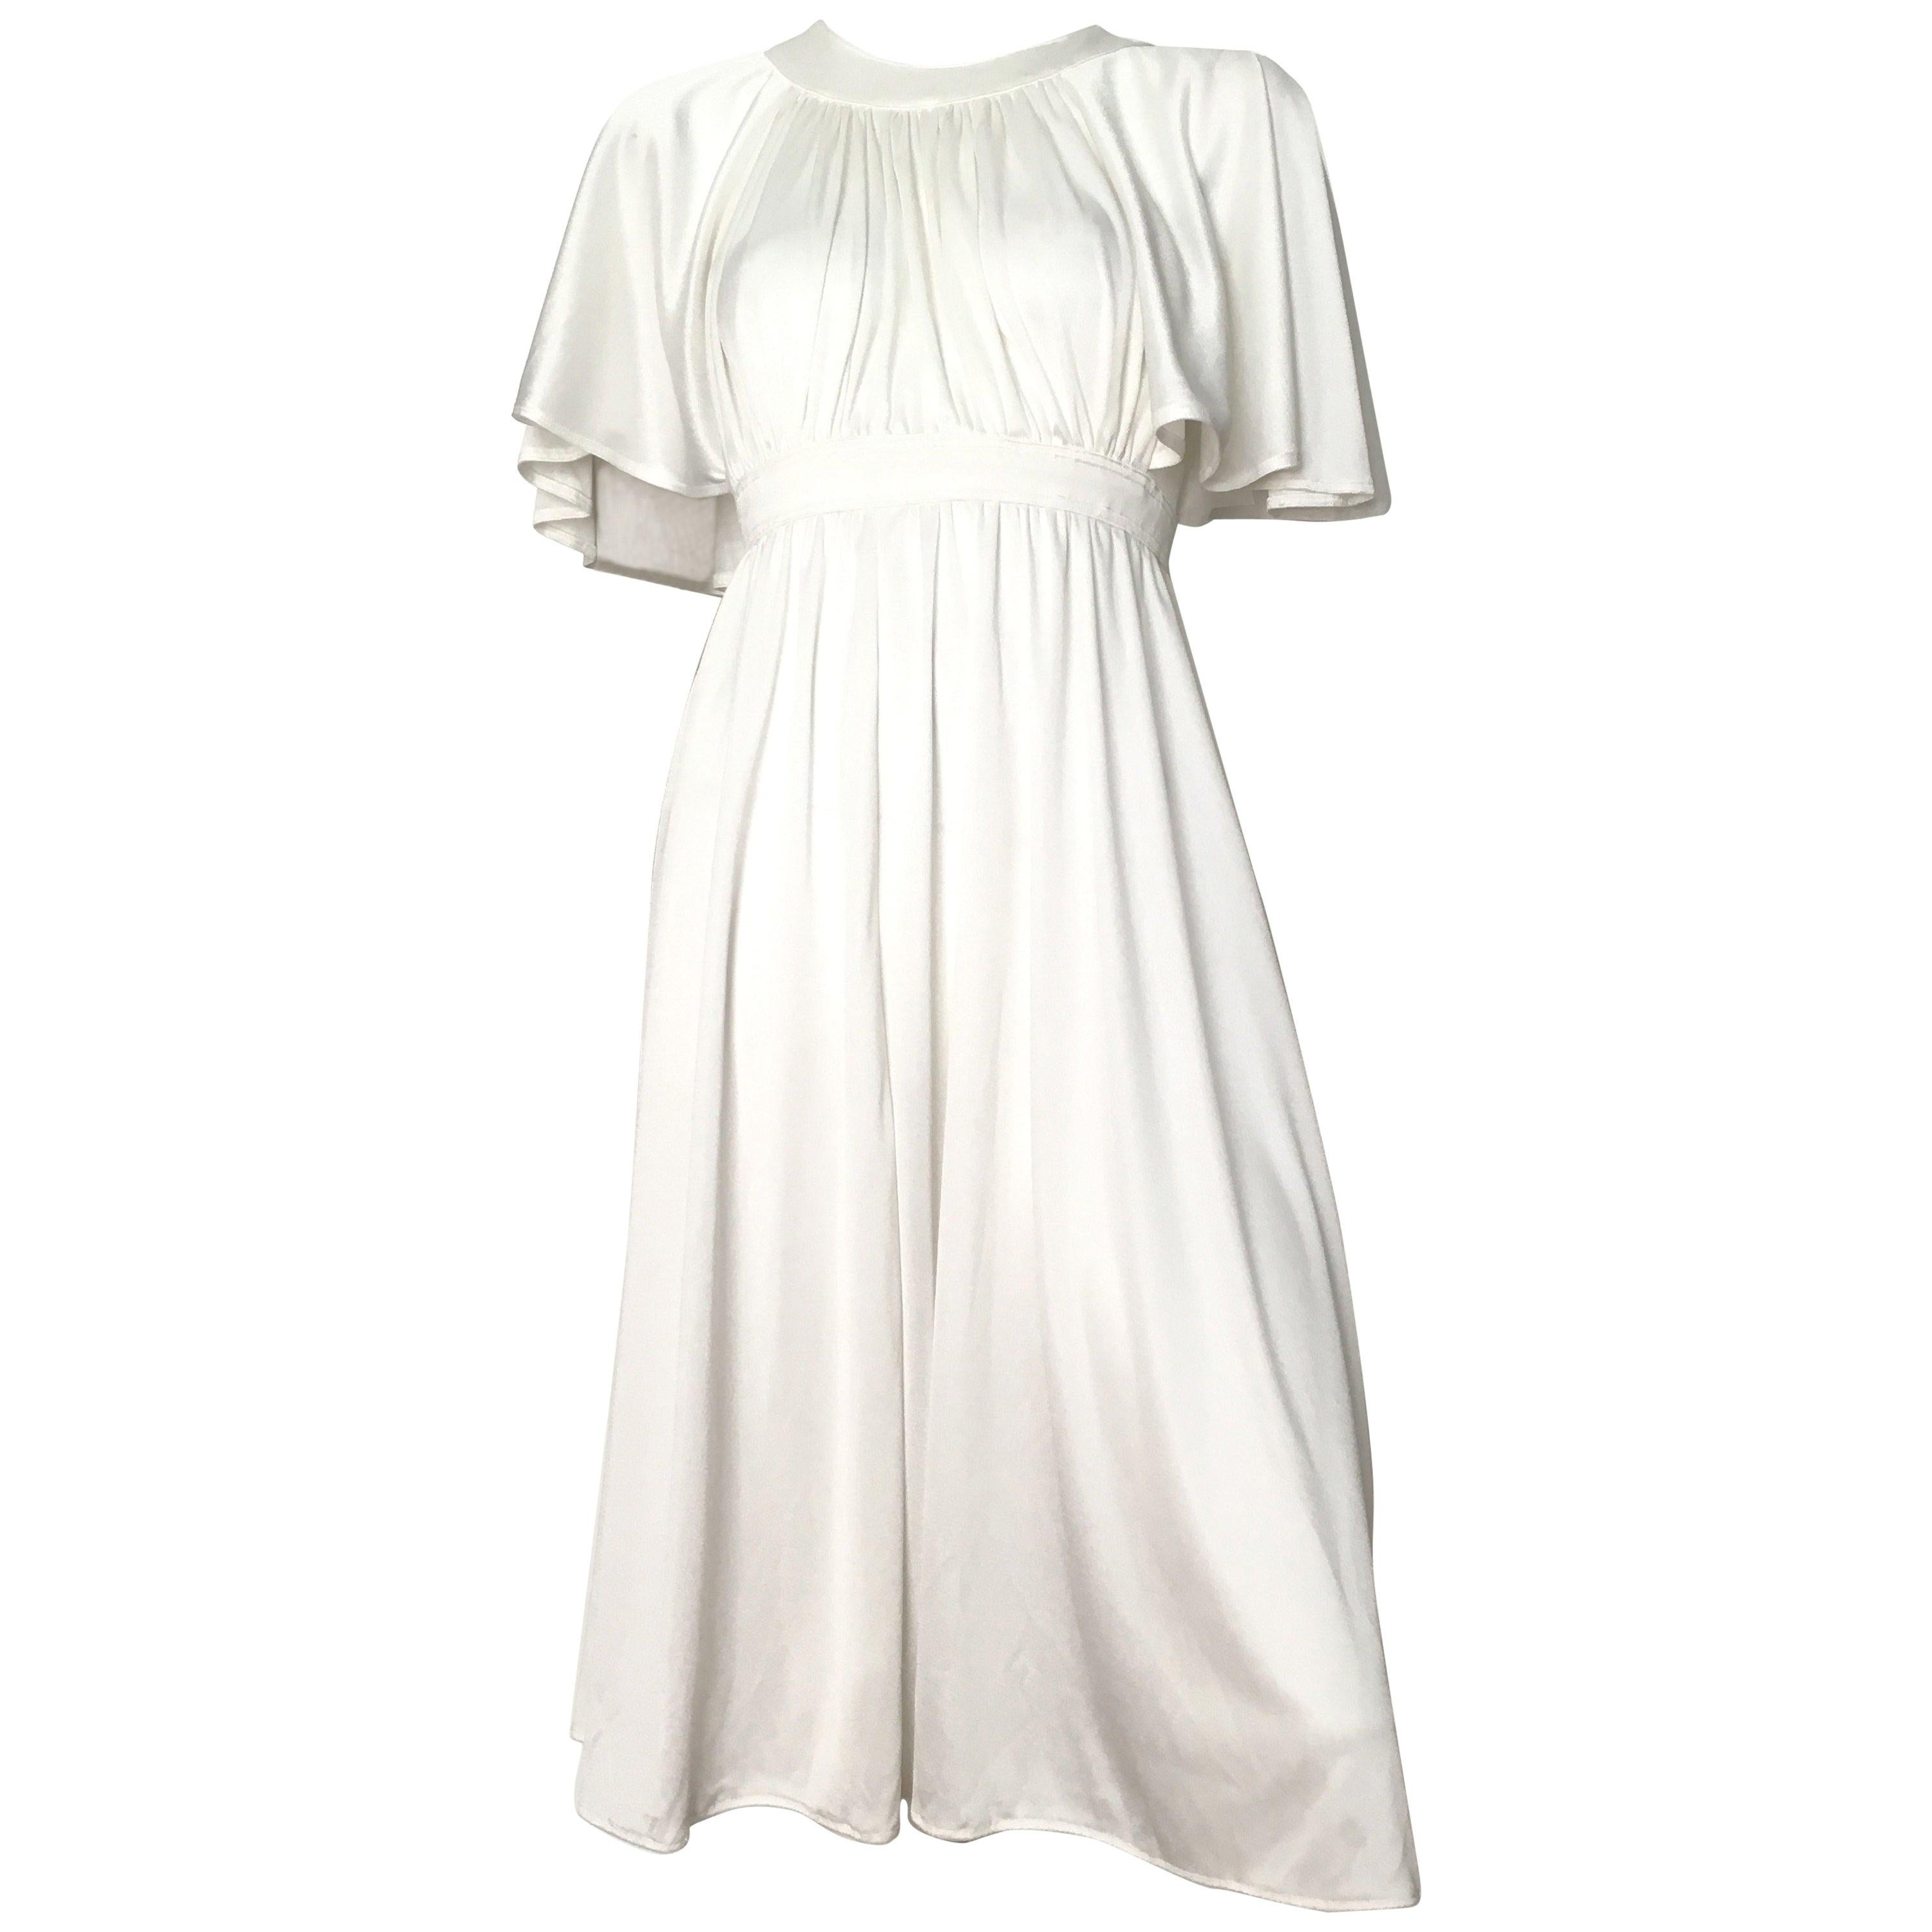 Pierre Cardin 1970s White Jersey Dress with Pockets Size 4. For Sale